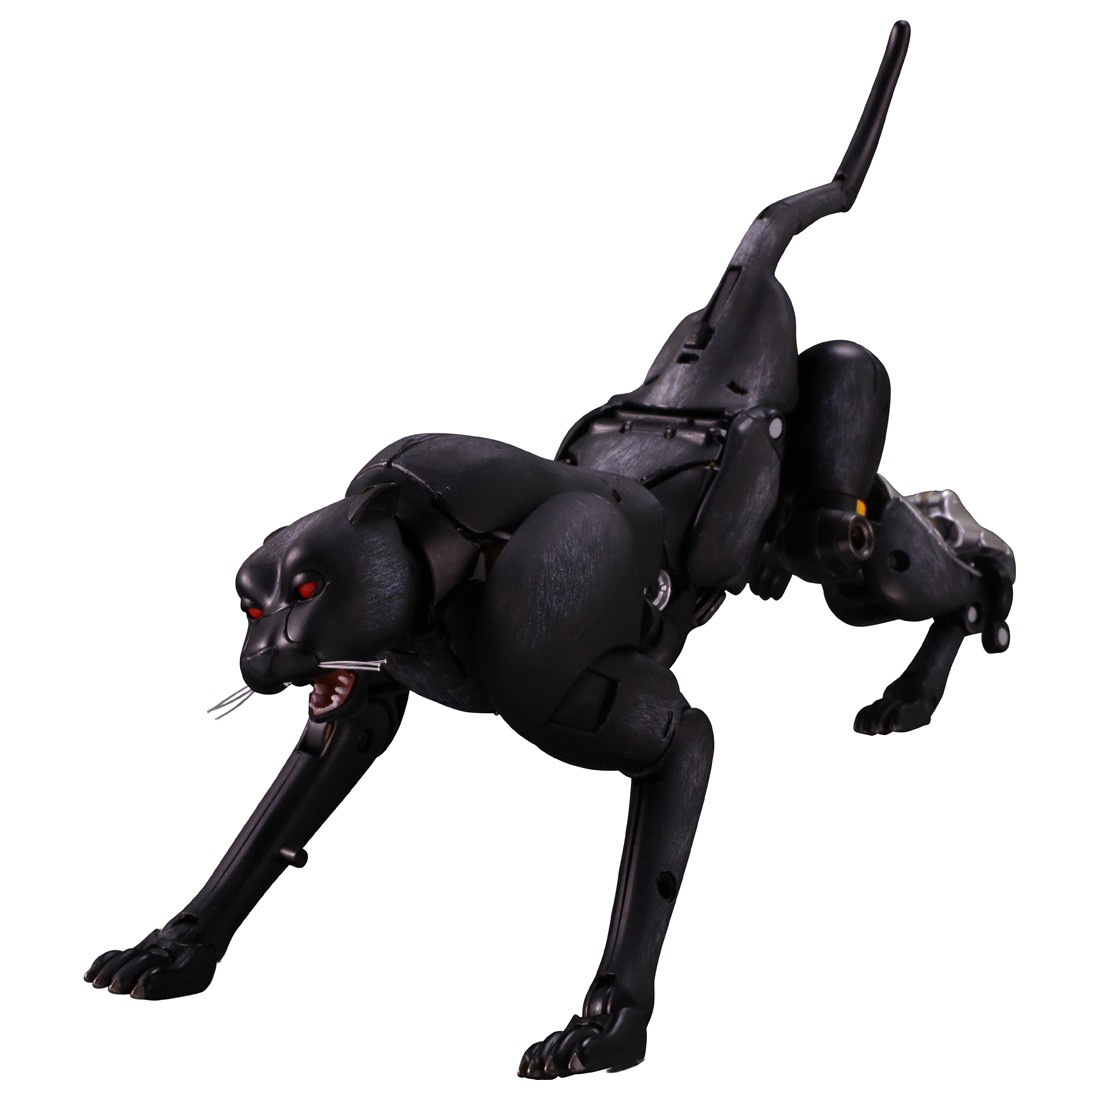 Transformers News: More Images of Transformers Masterpiece MP-34S Shadow Panther